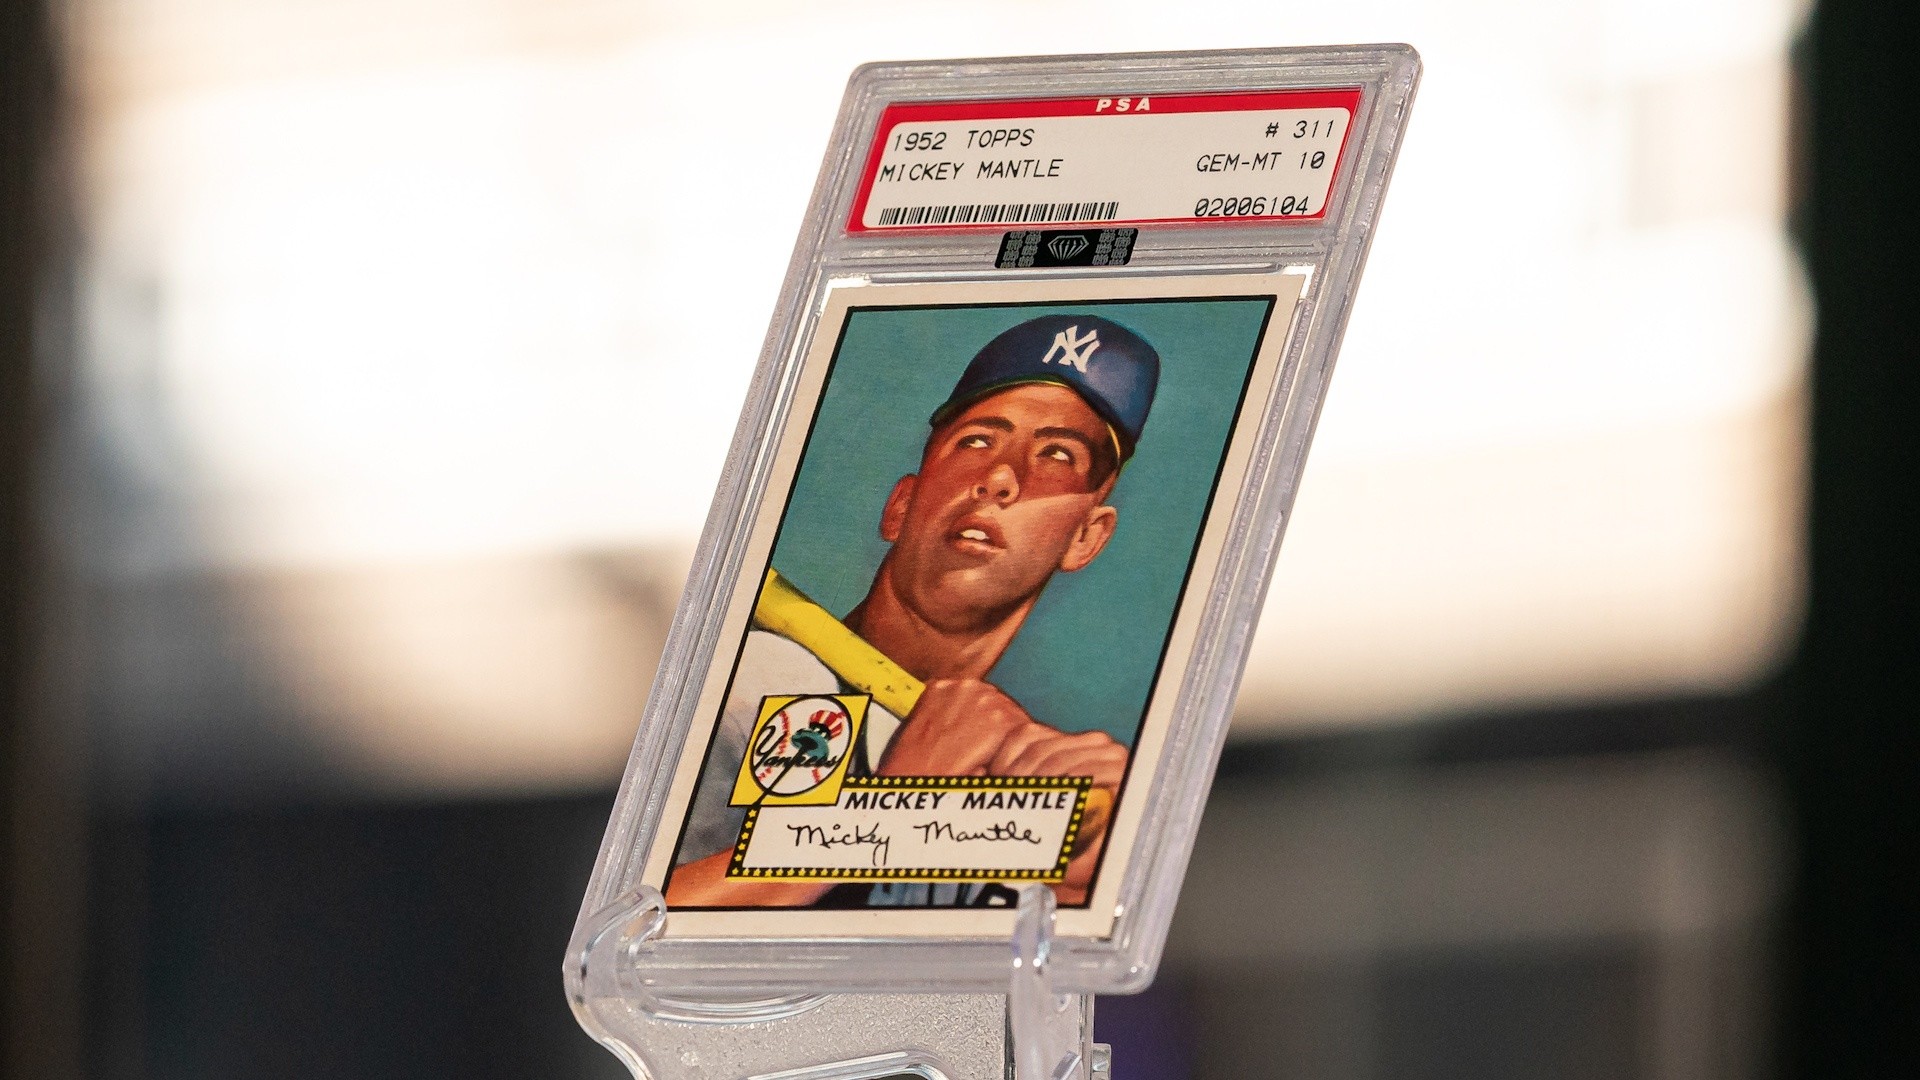 Only Ten Babe Ruth Rookie Baseball Cards Survive. Now, One Is Going Up for  Auction, Smart News